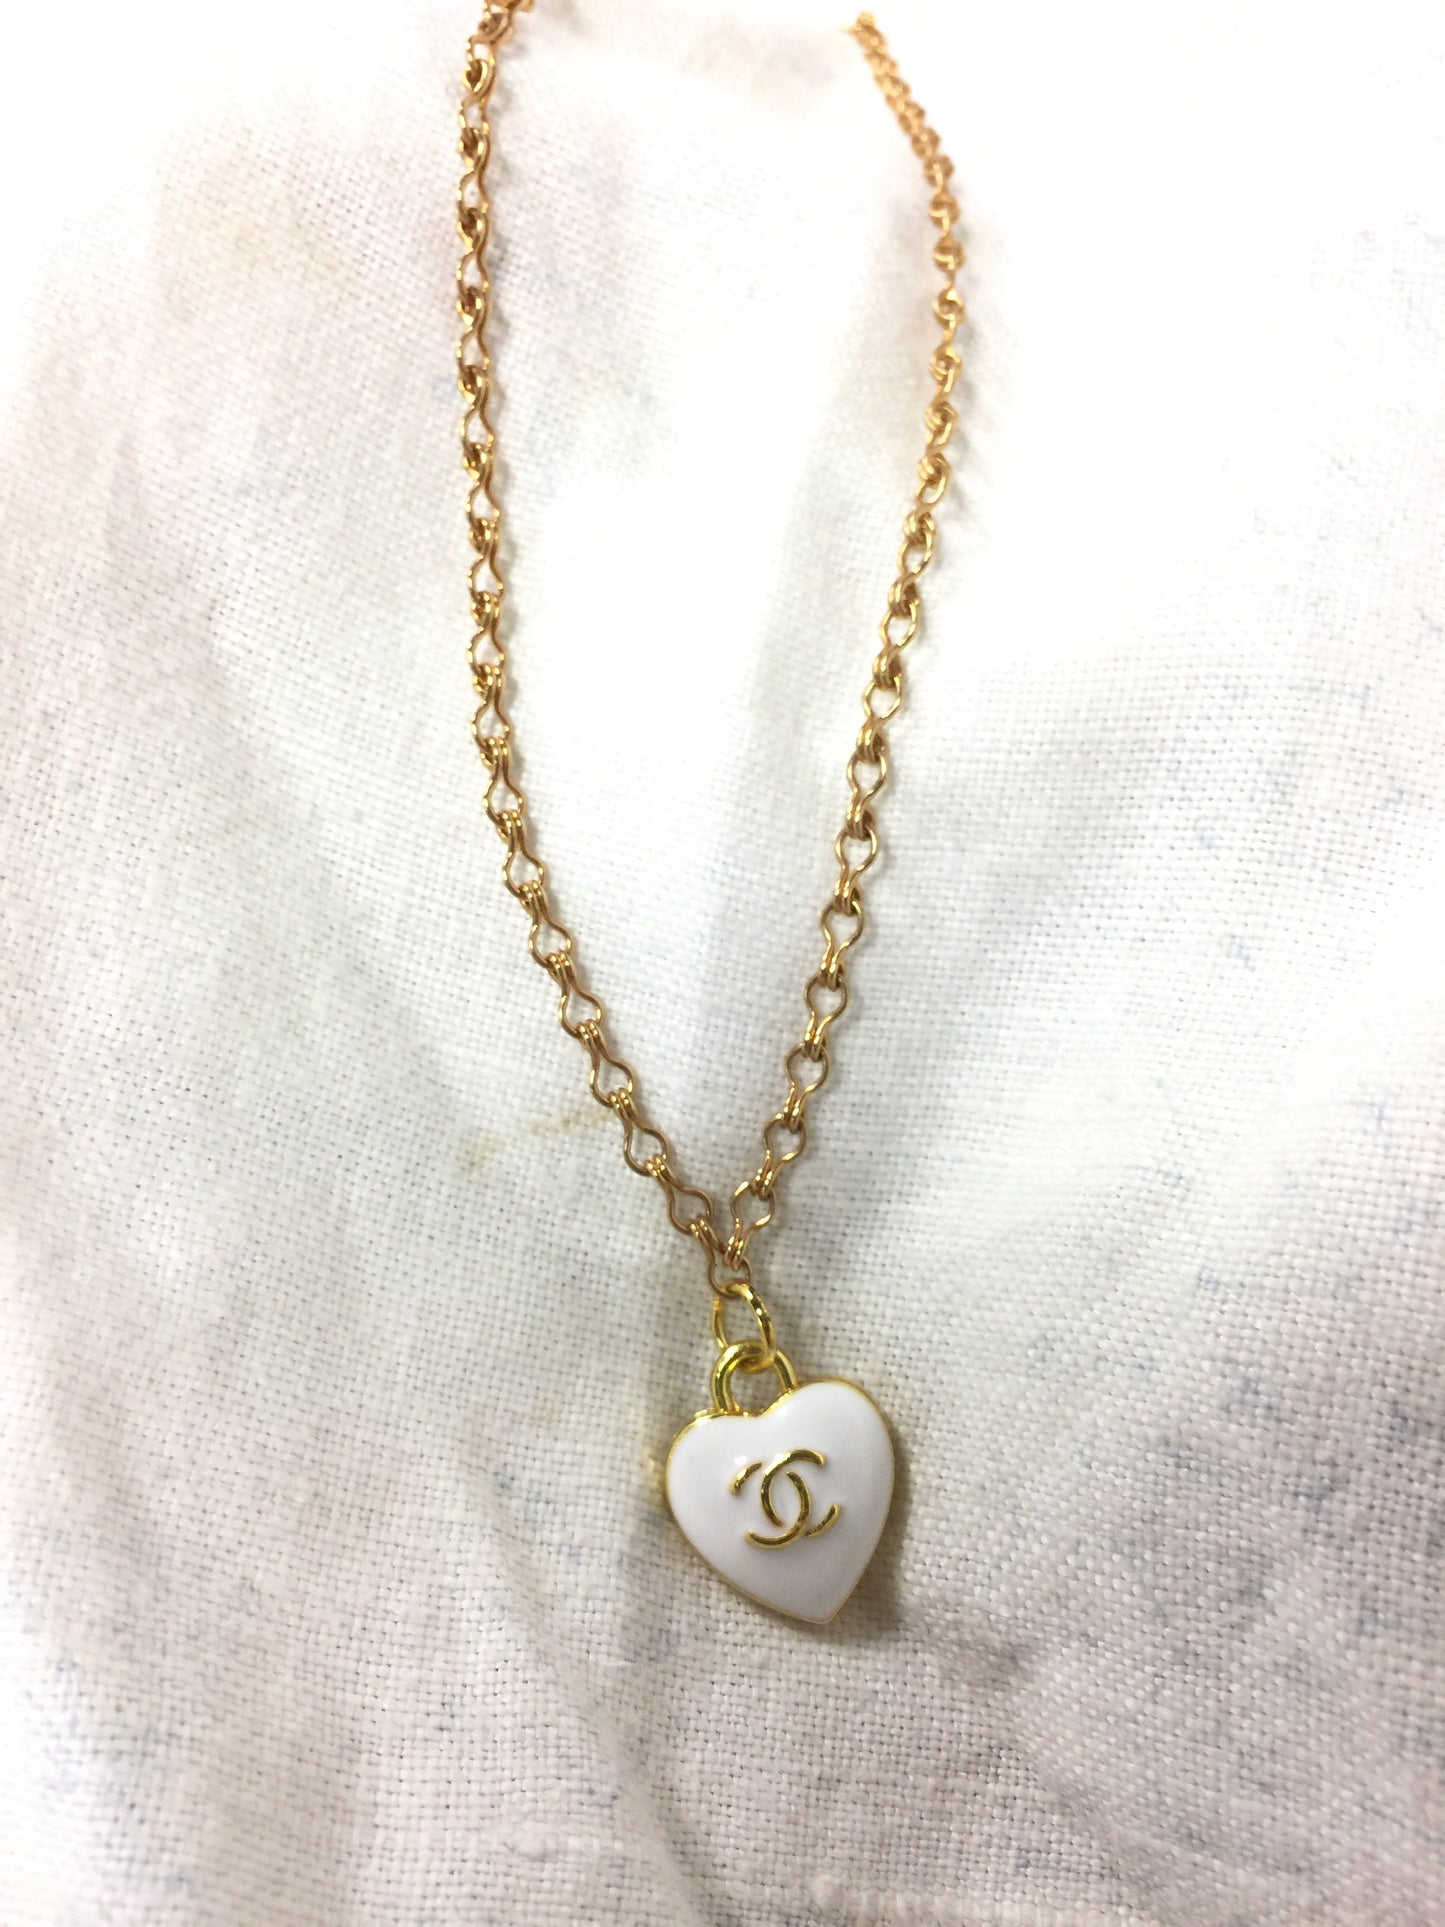 LS Upcycled CC Heart Necklace